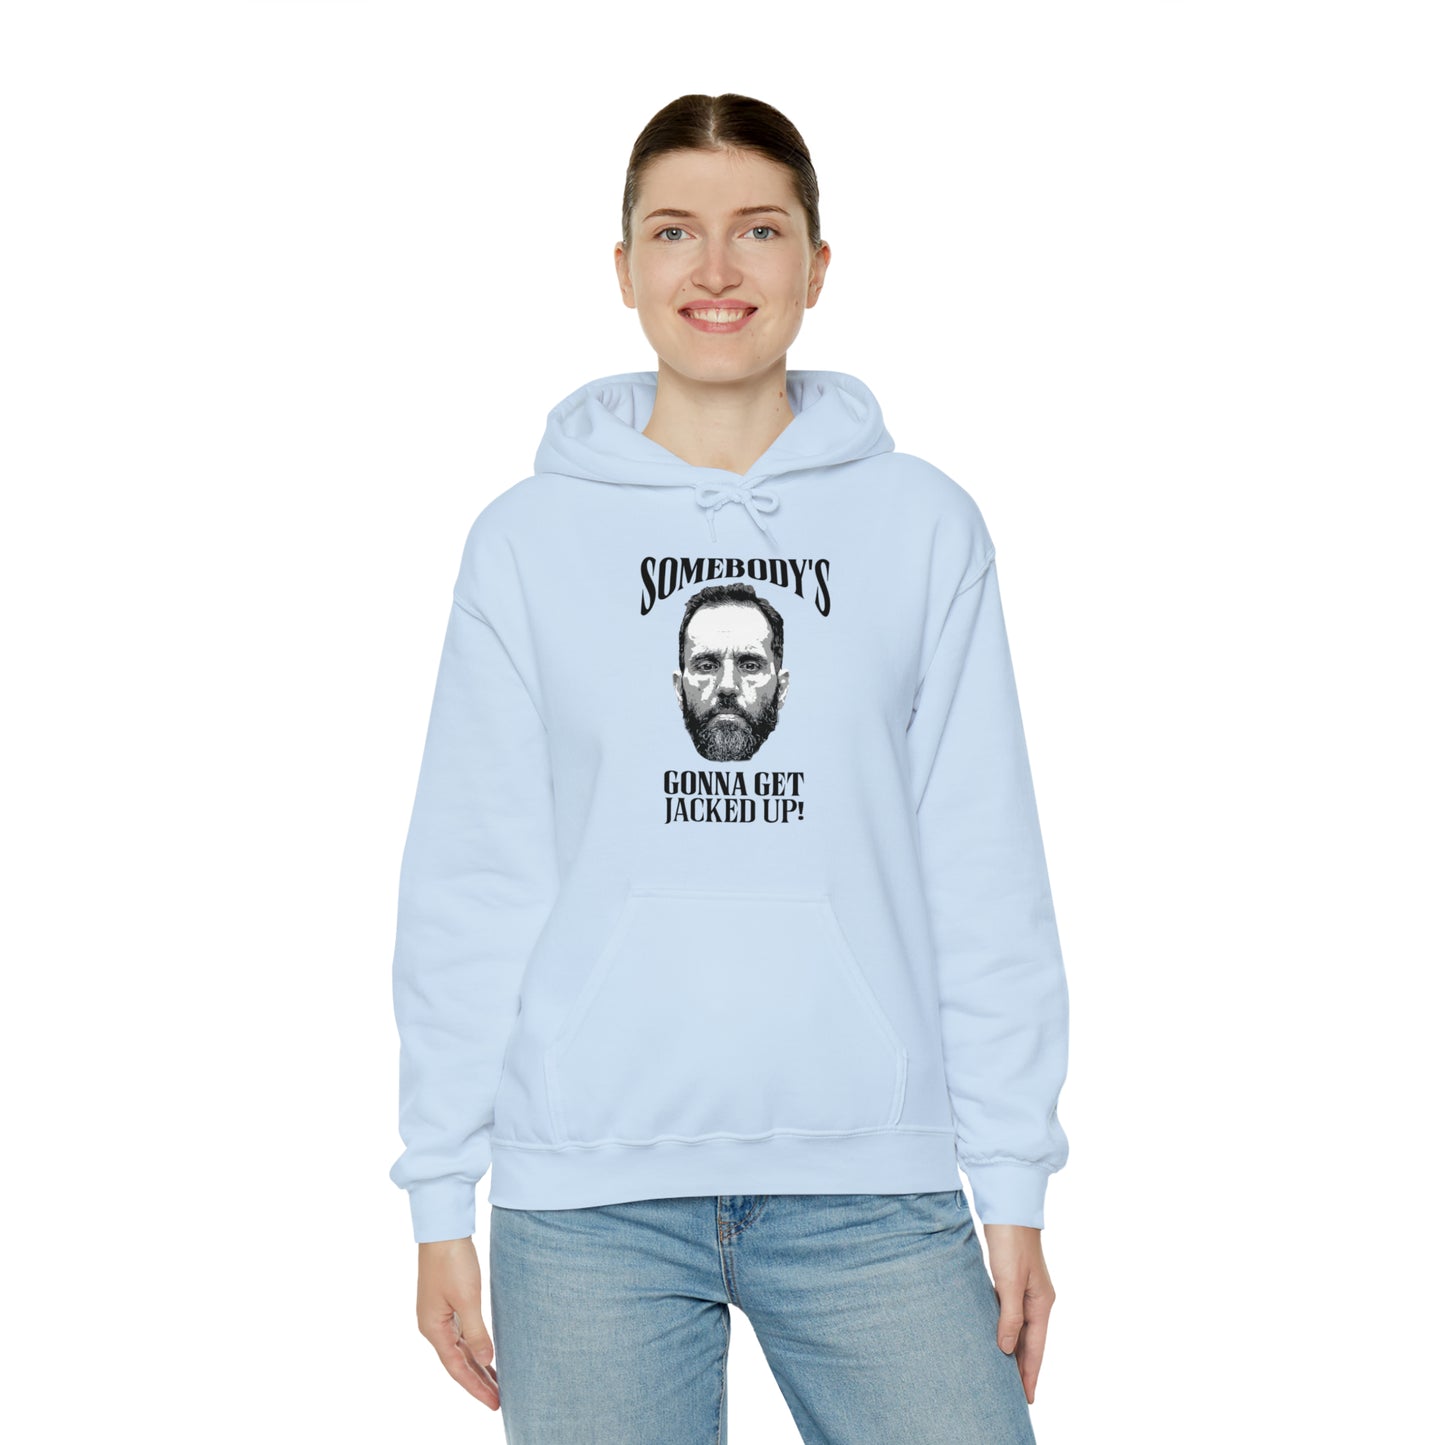 Somebody’s-gonna-get-jacked-up Unisex Heavy Blend™ Hooded